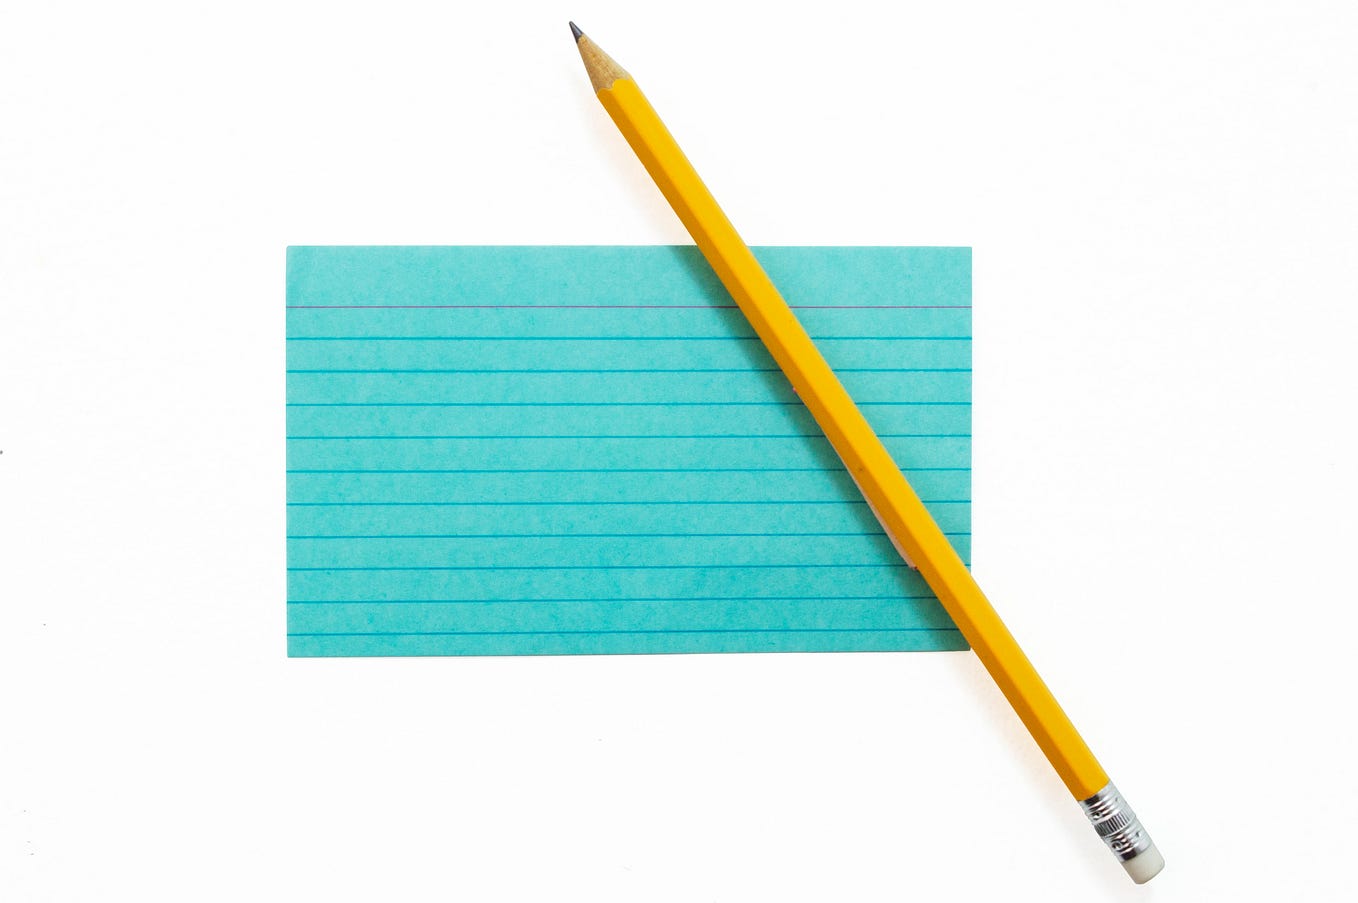 What If an Index Card Could Make You More Productive?